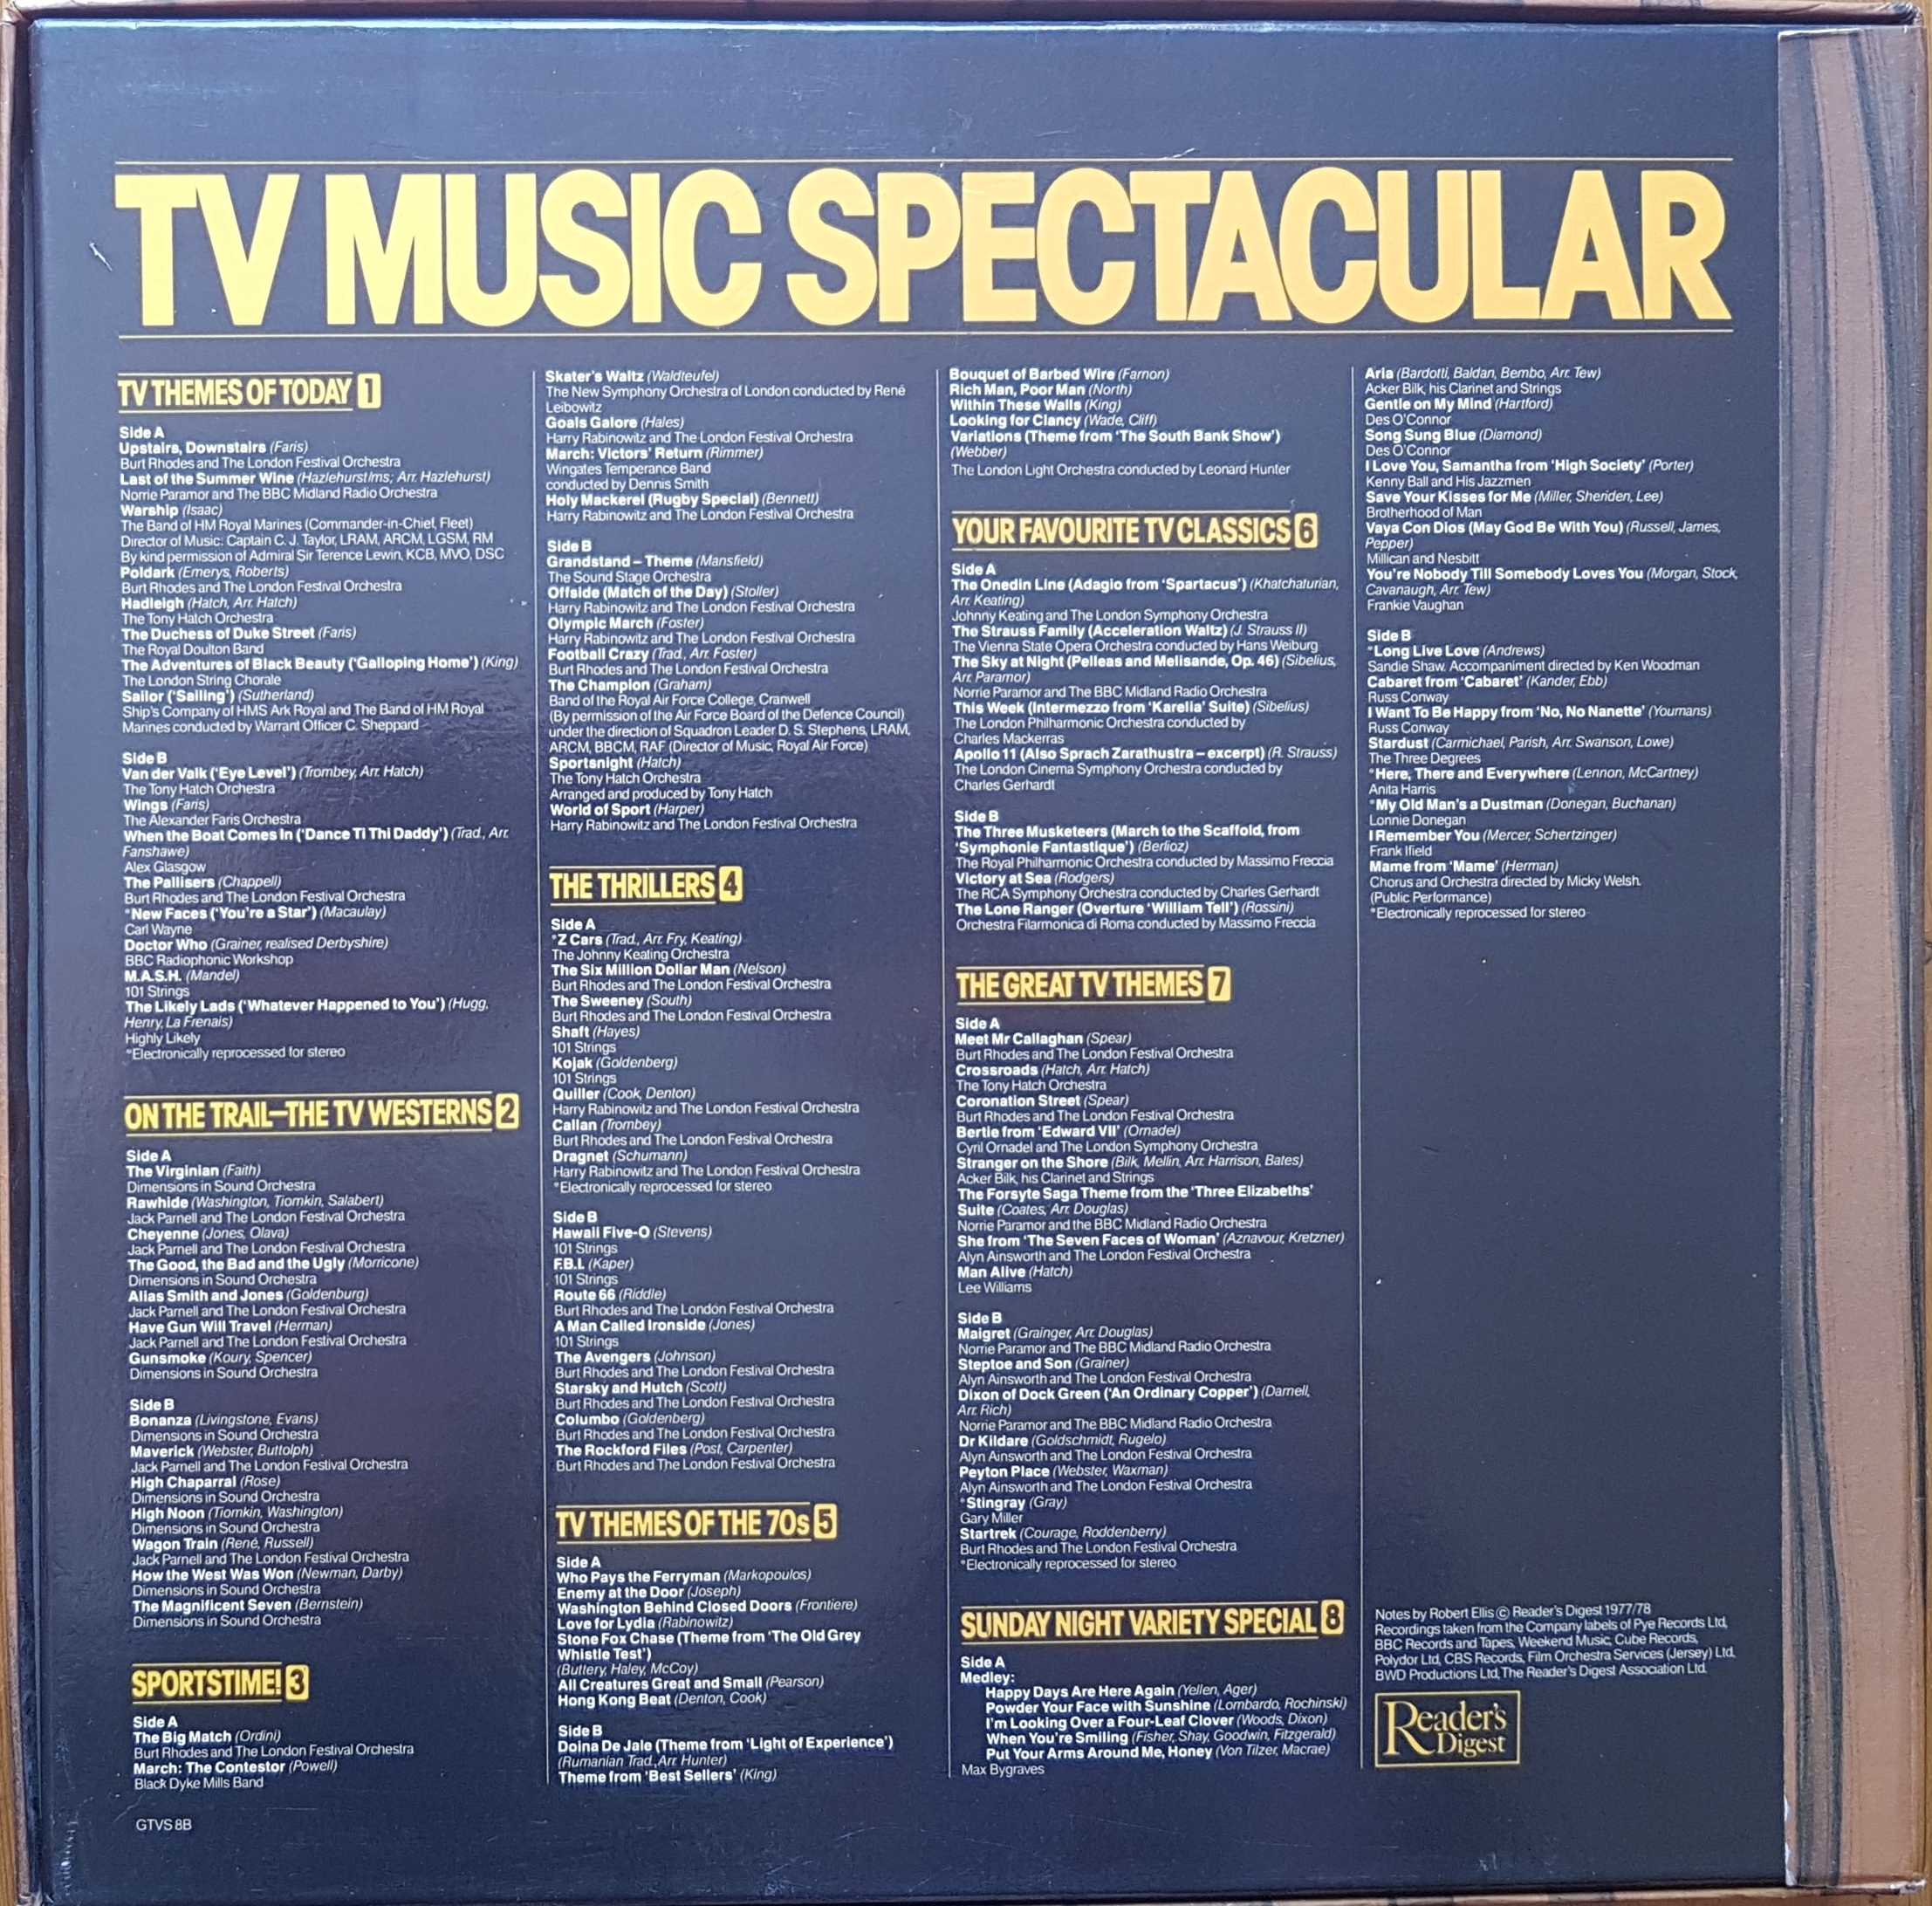 Picture of GTVS 8B TV music spectacular by artist Various from ITV, Channel 4 and Channel 5 library